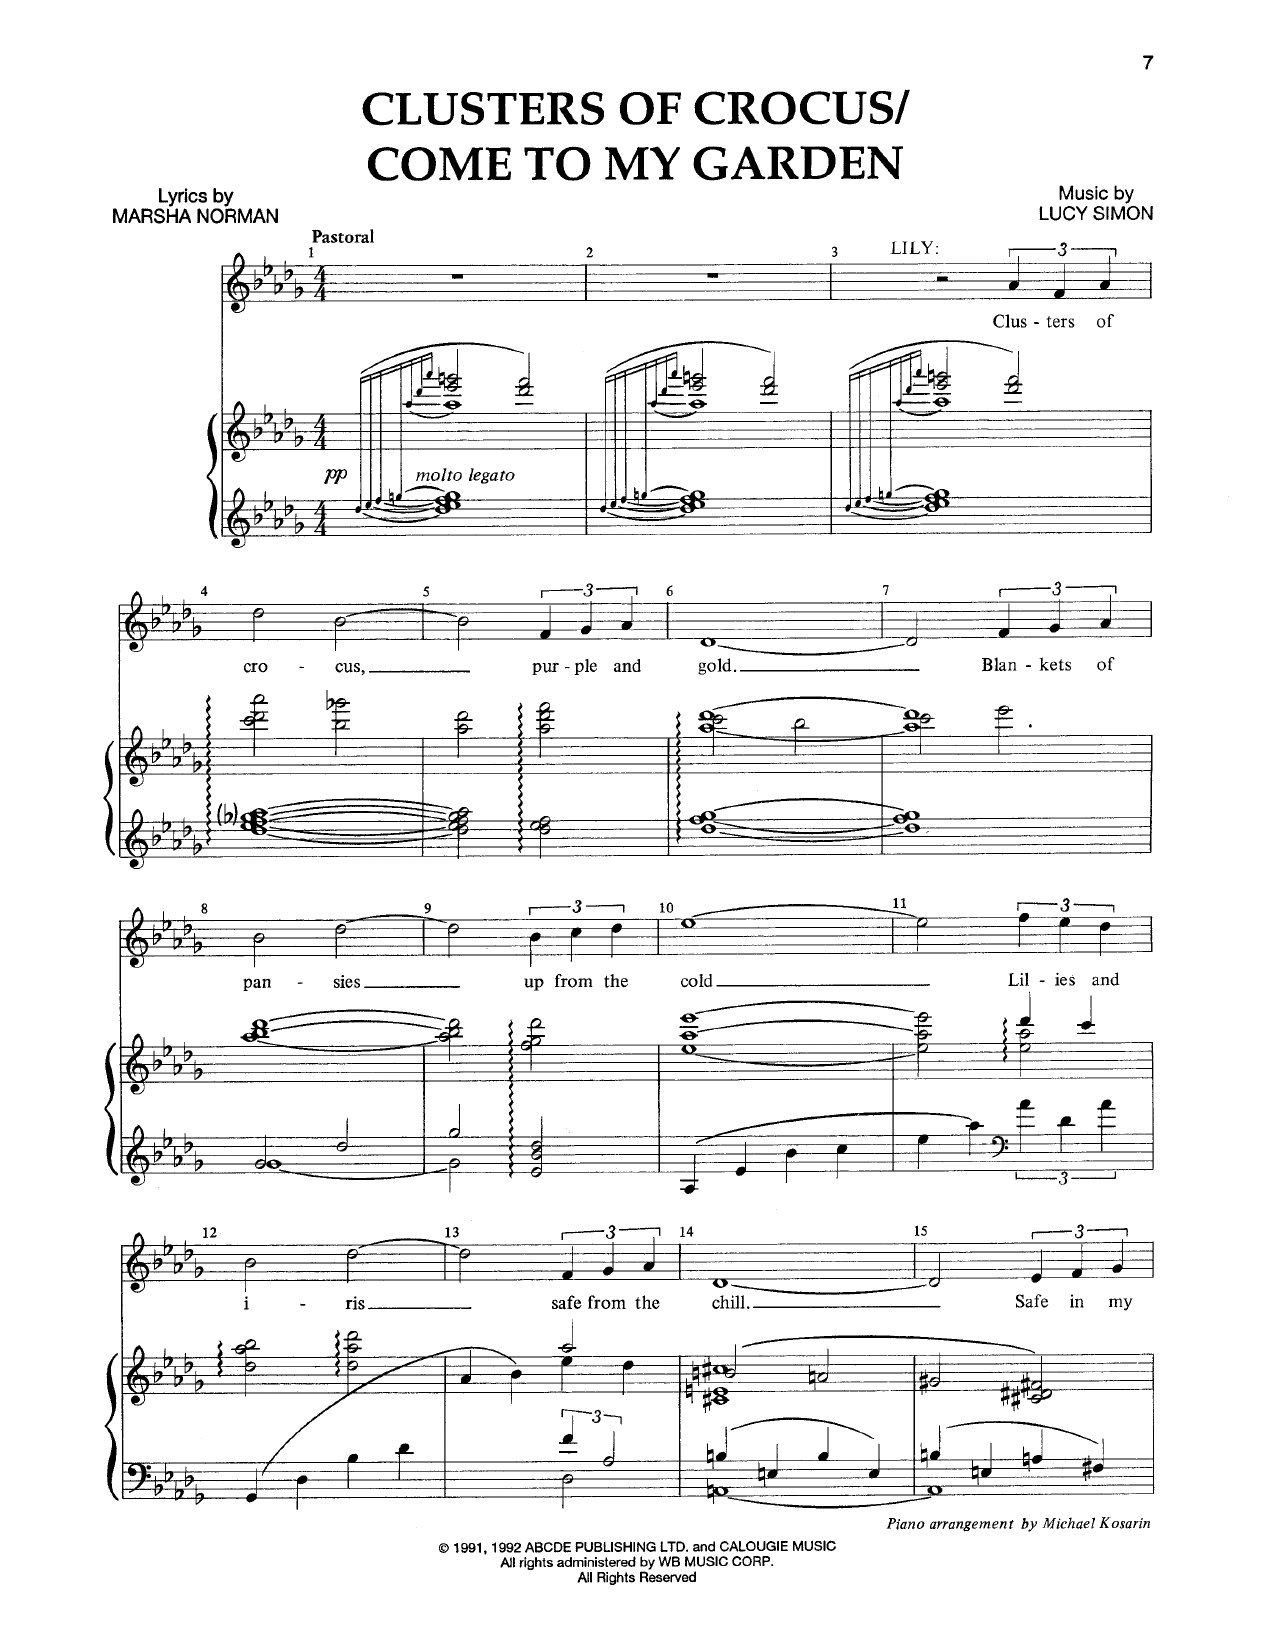 Download Marsha Norman & Lucy Simon Clusters Of Crocus (Opening Dream) Sheet Music